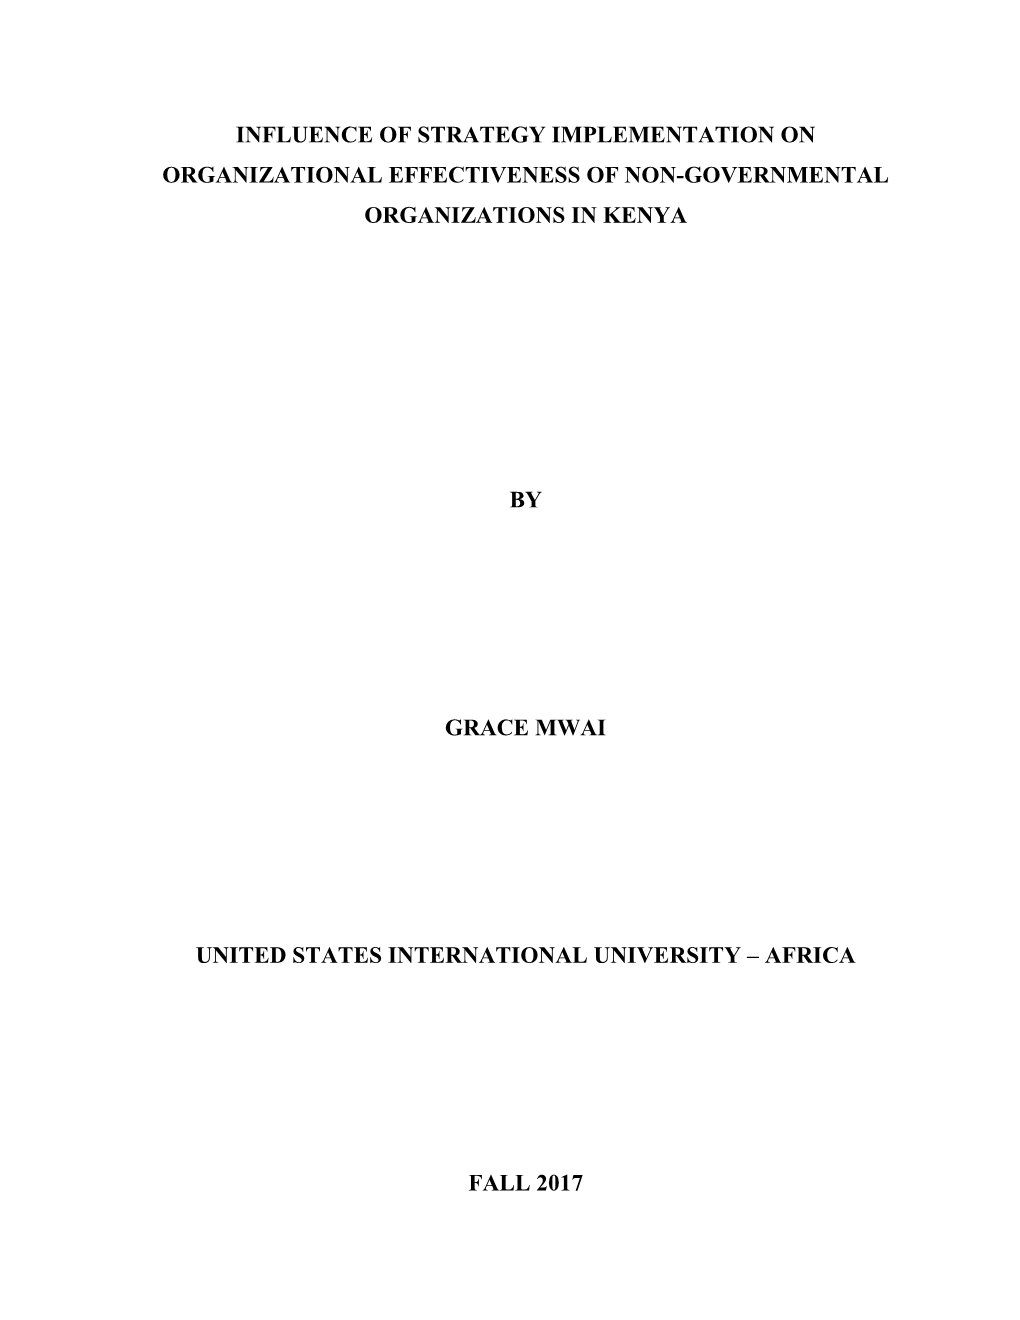 Influence of Strategy Implementation on Organizational Effectiveness of Non-Governmental Organizations in Kenya